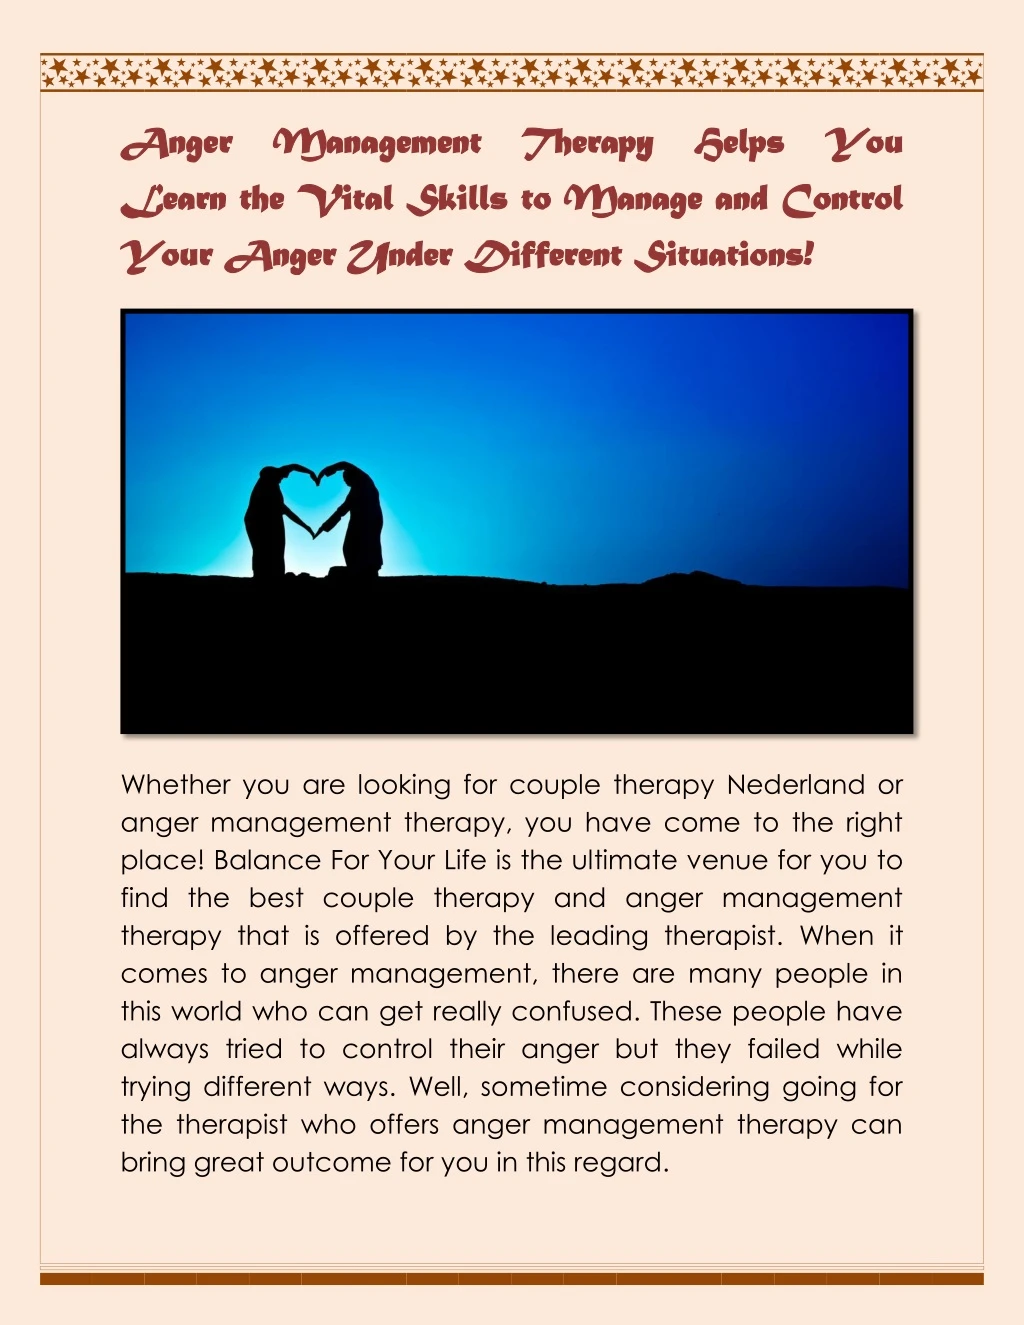 anger management therapy helps you anger